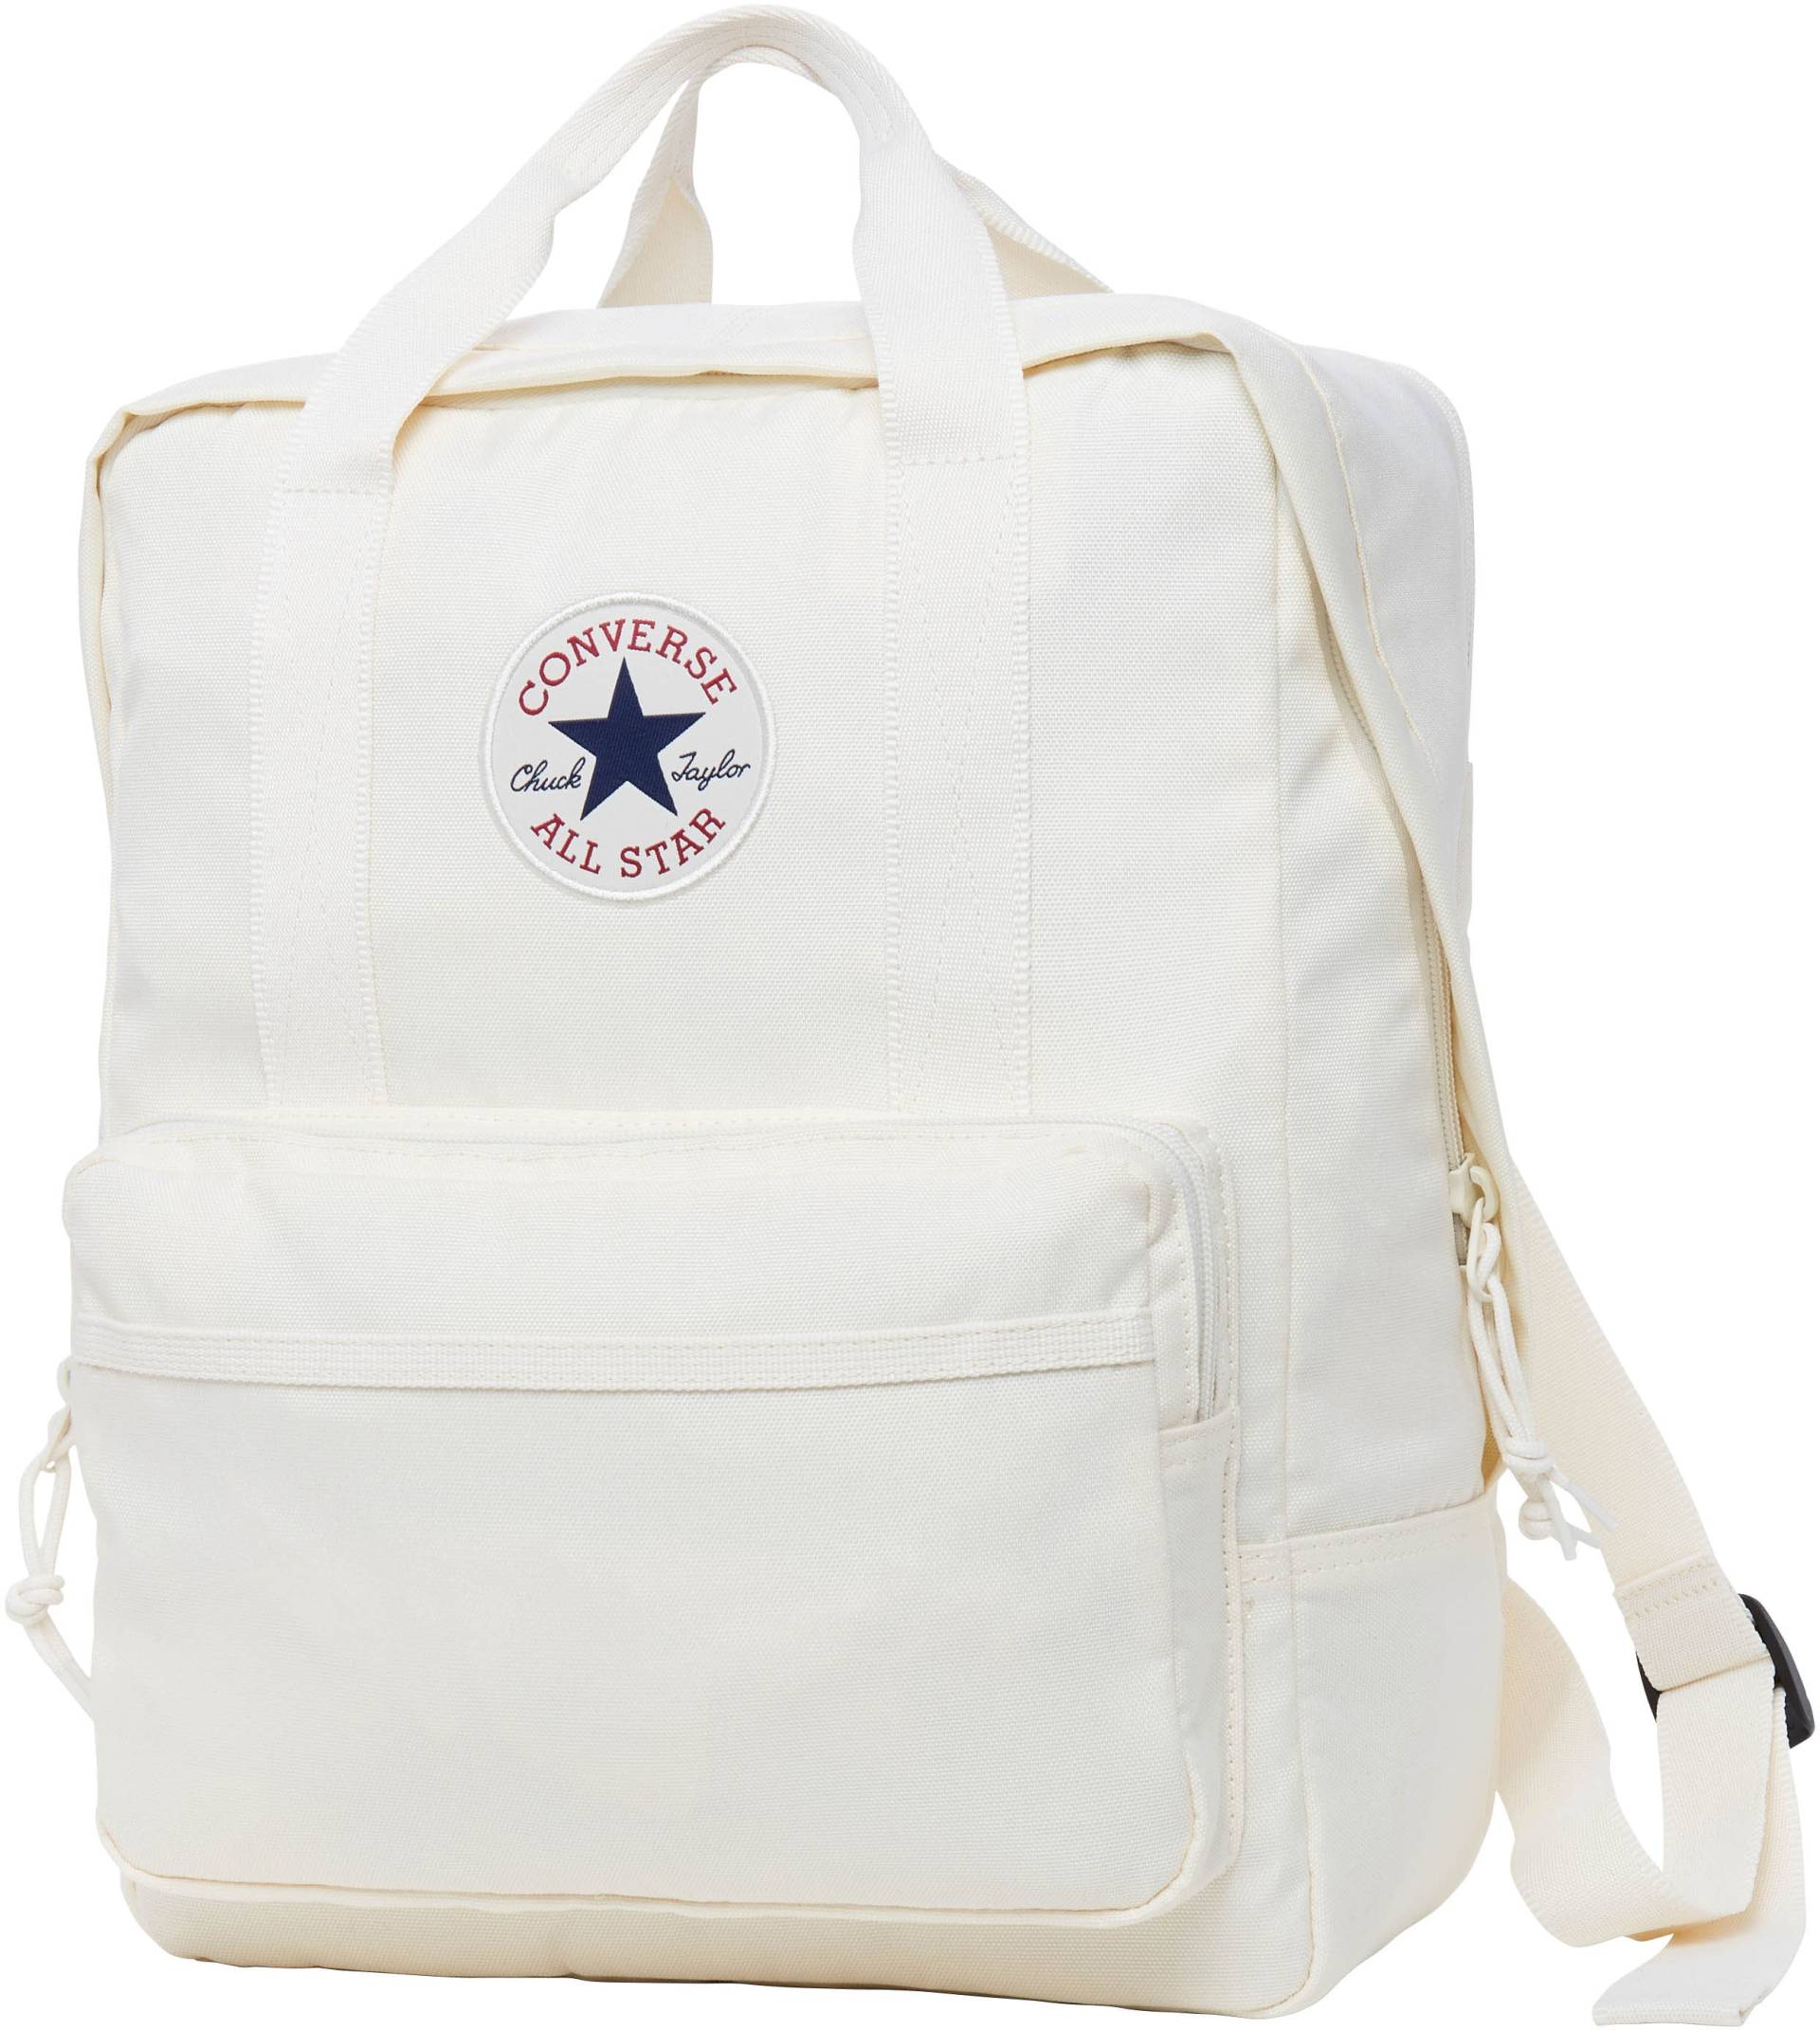 Converse Rucksack »SMALL SQUARE BACKPACK« von Converse